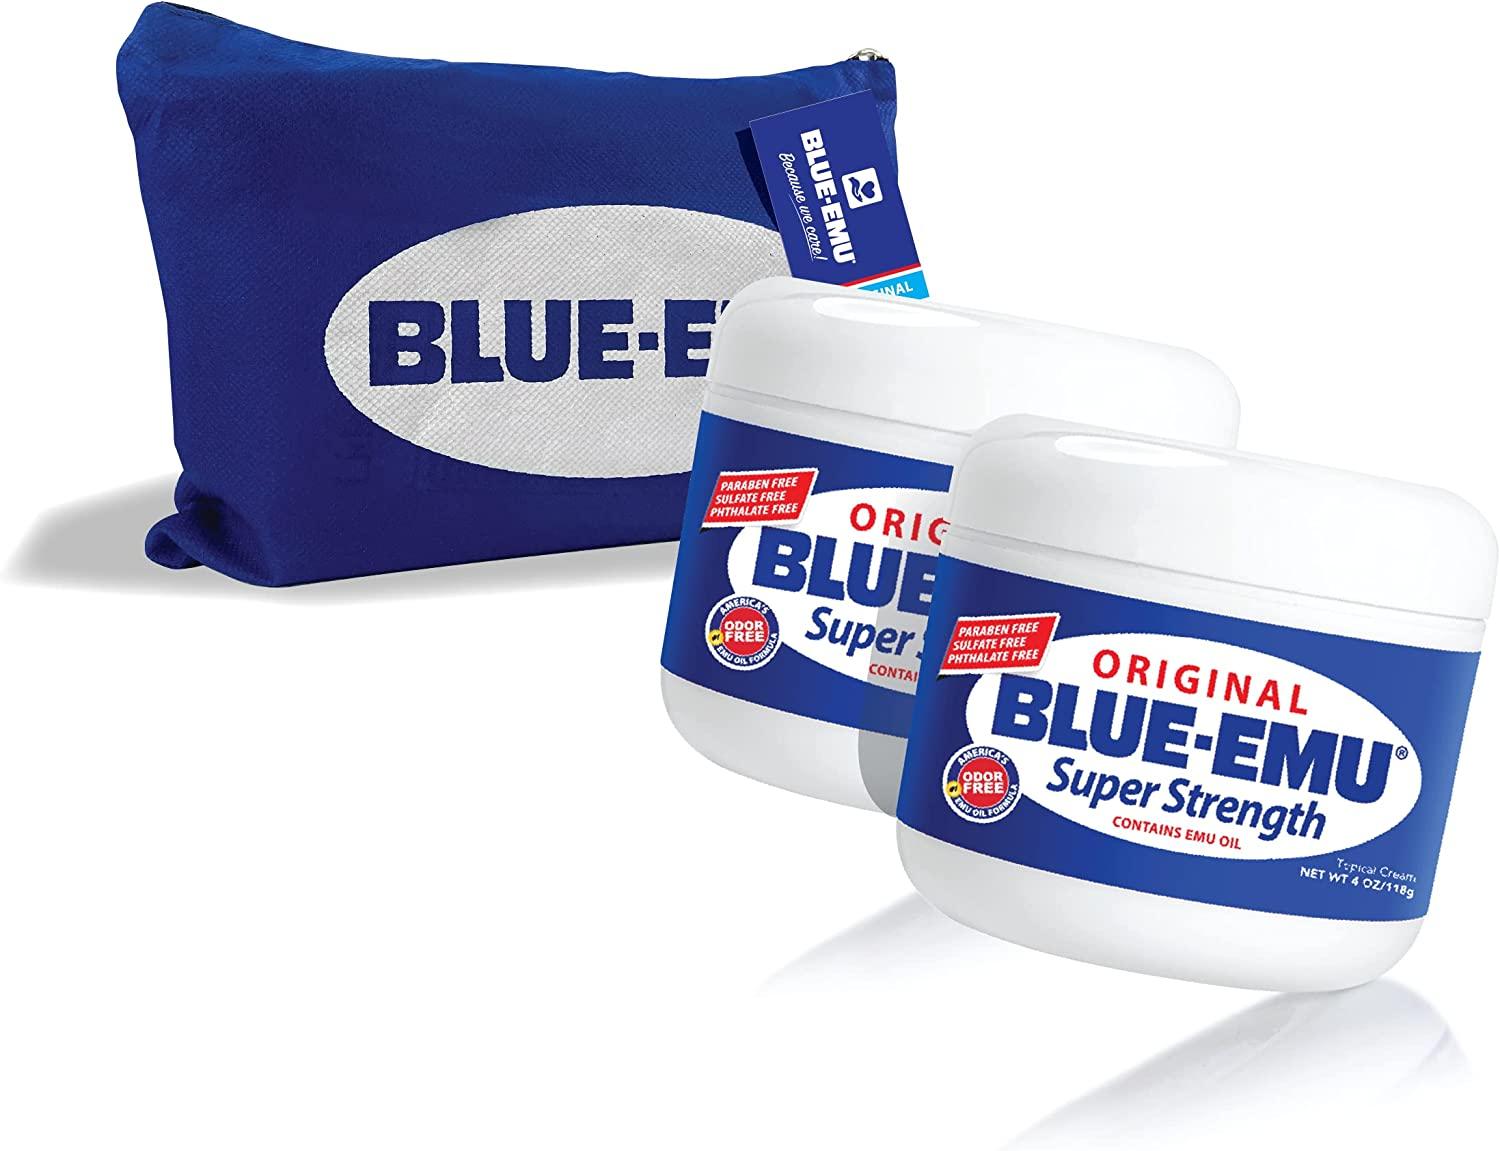 Blue Emu Original Analgesic Cream Super Strength Soothes Joints Muscles 12  Ounce 885513545534